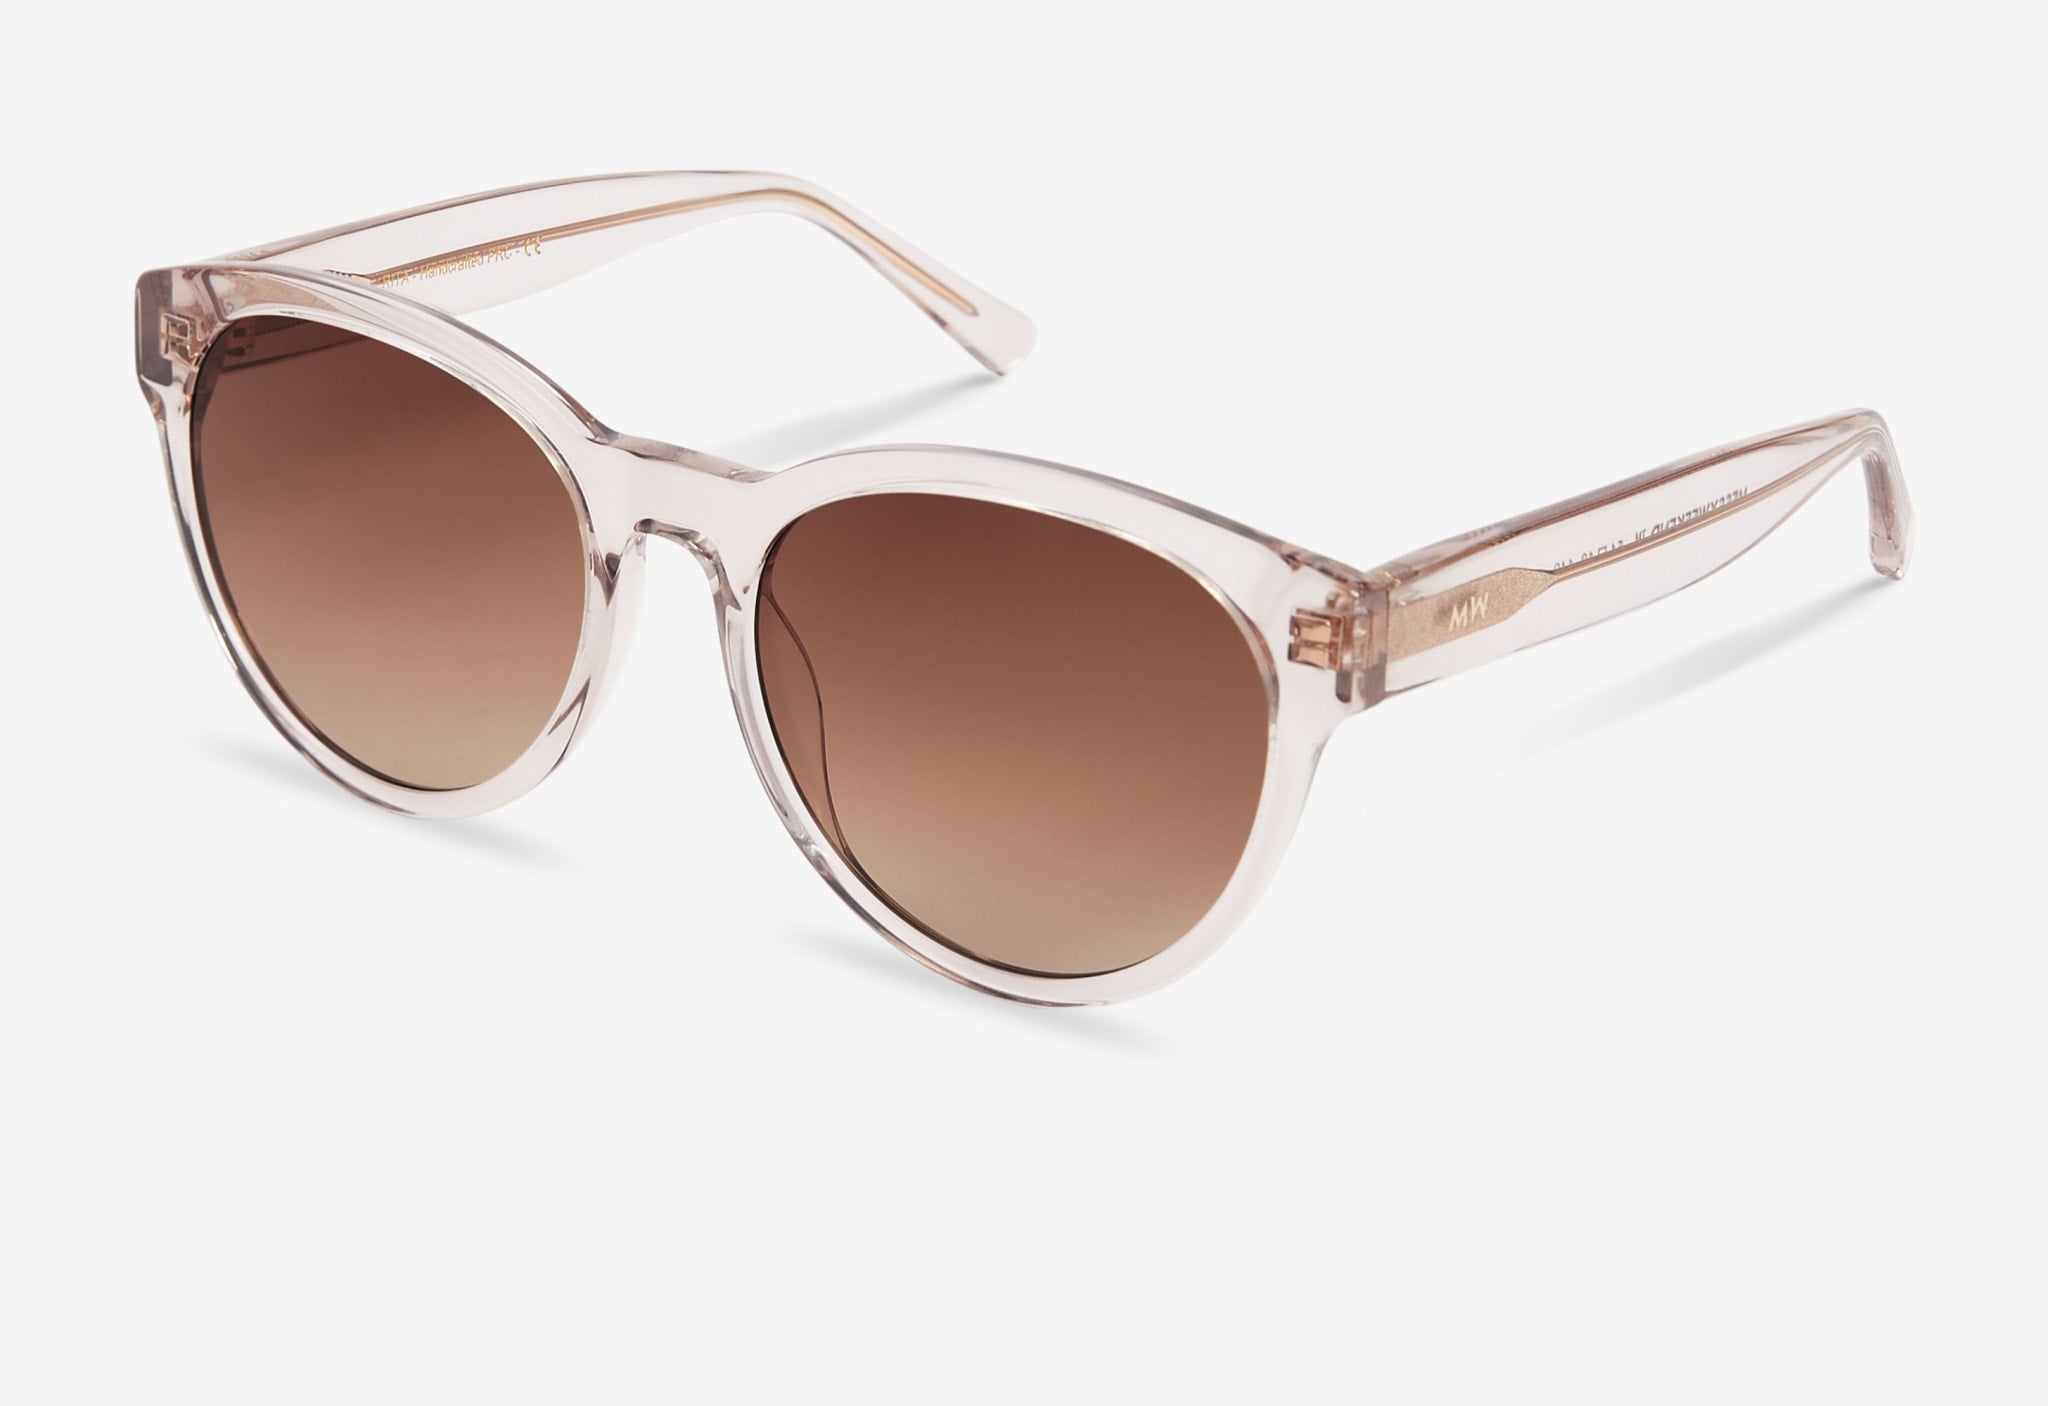 Oversized design sunglasses with brown lens| MessyWeekend